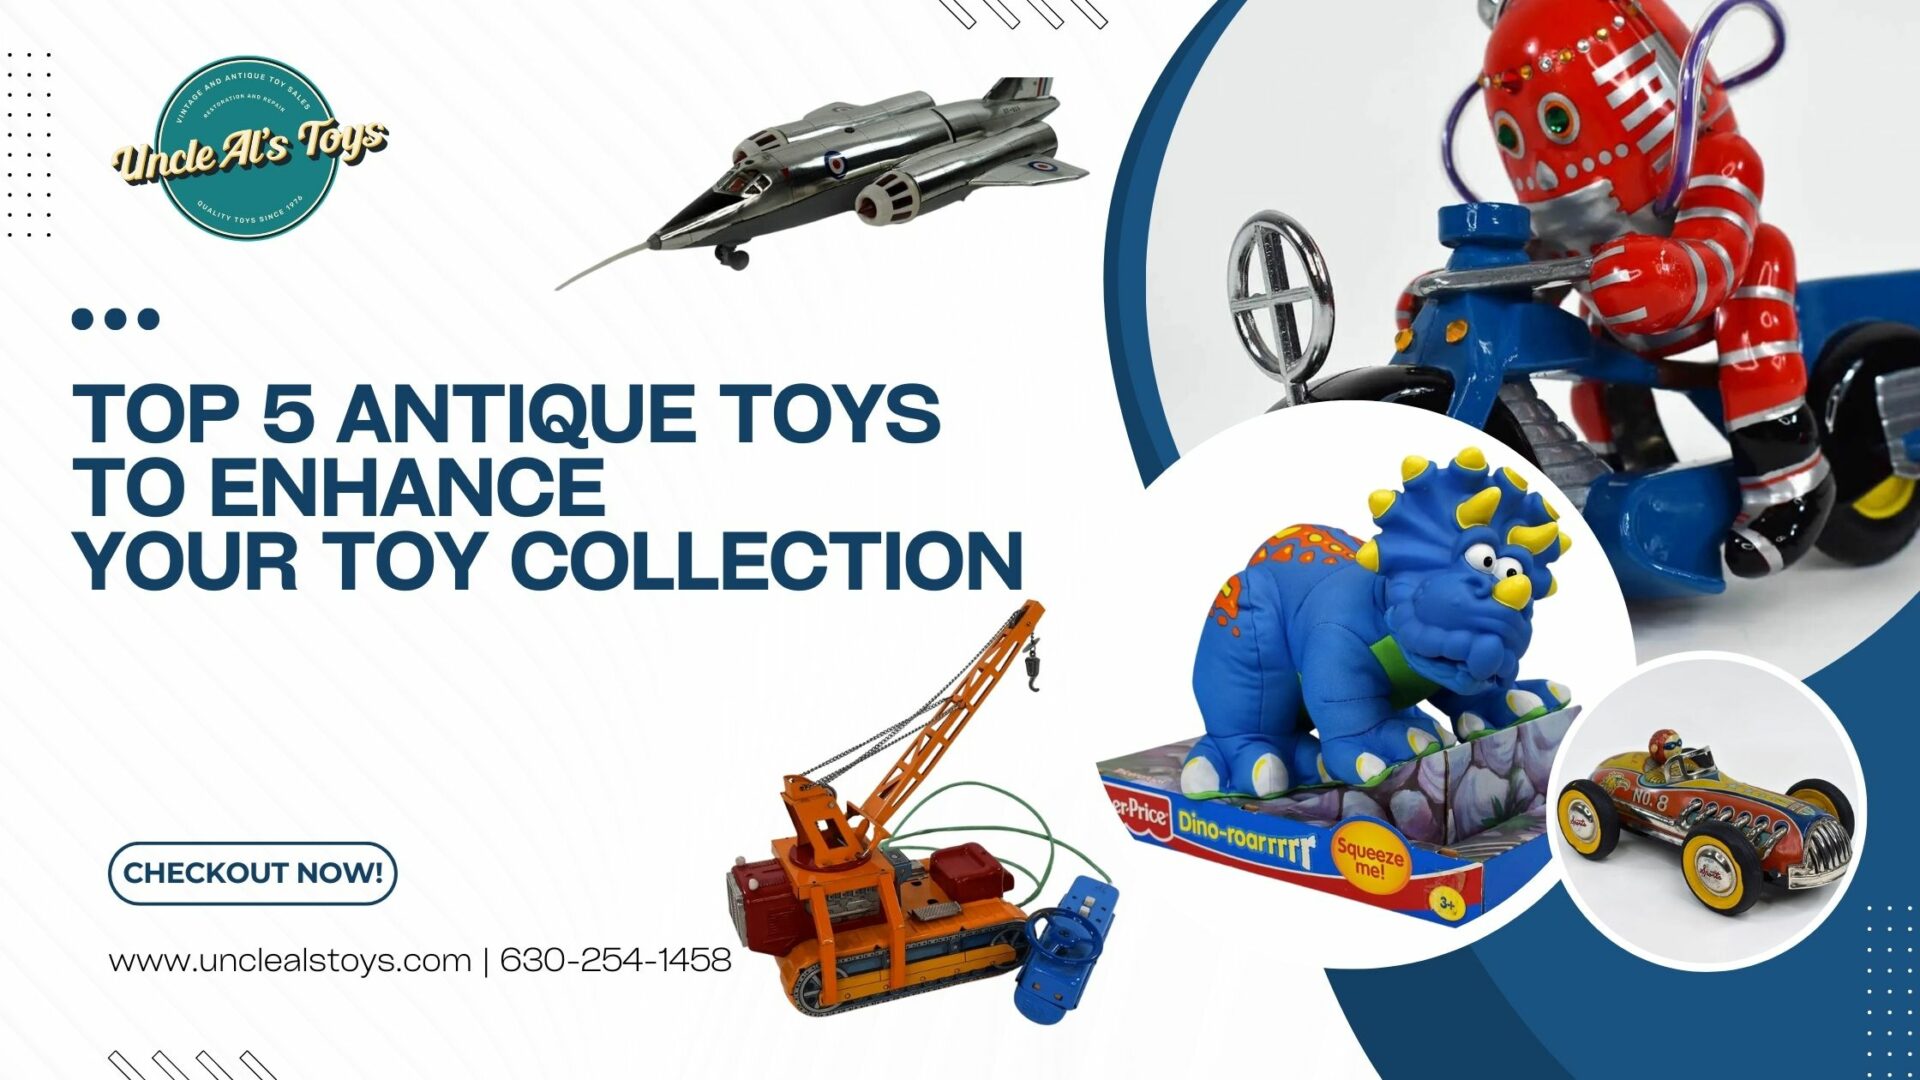 Discover the Top 5 Antique Toys | Vintage Collectibles Guide